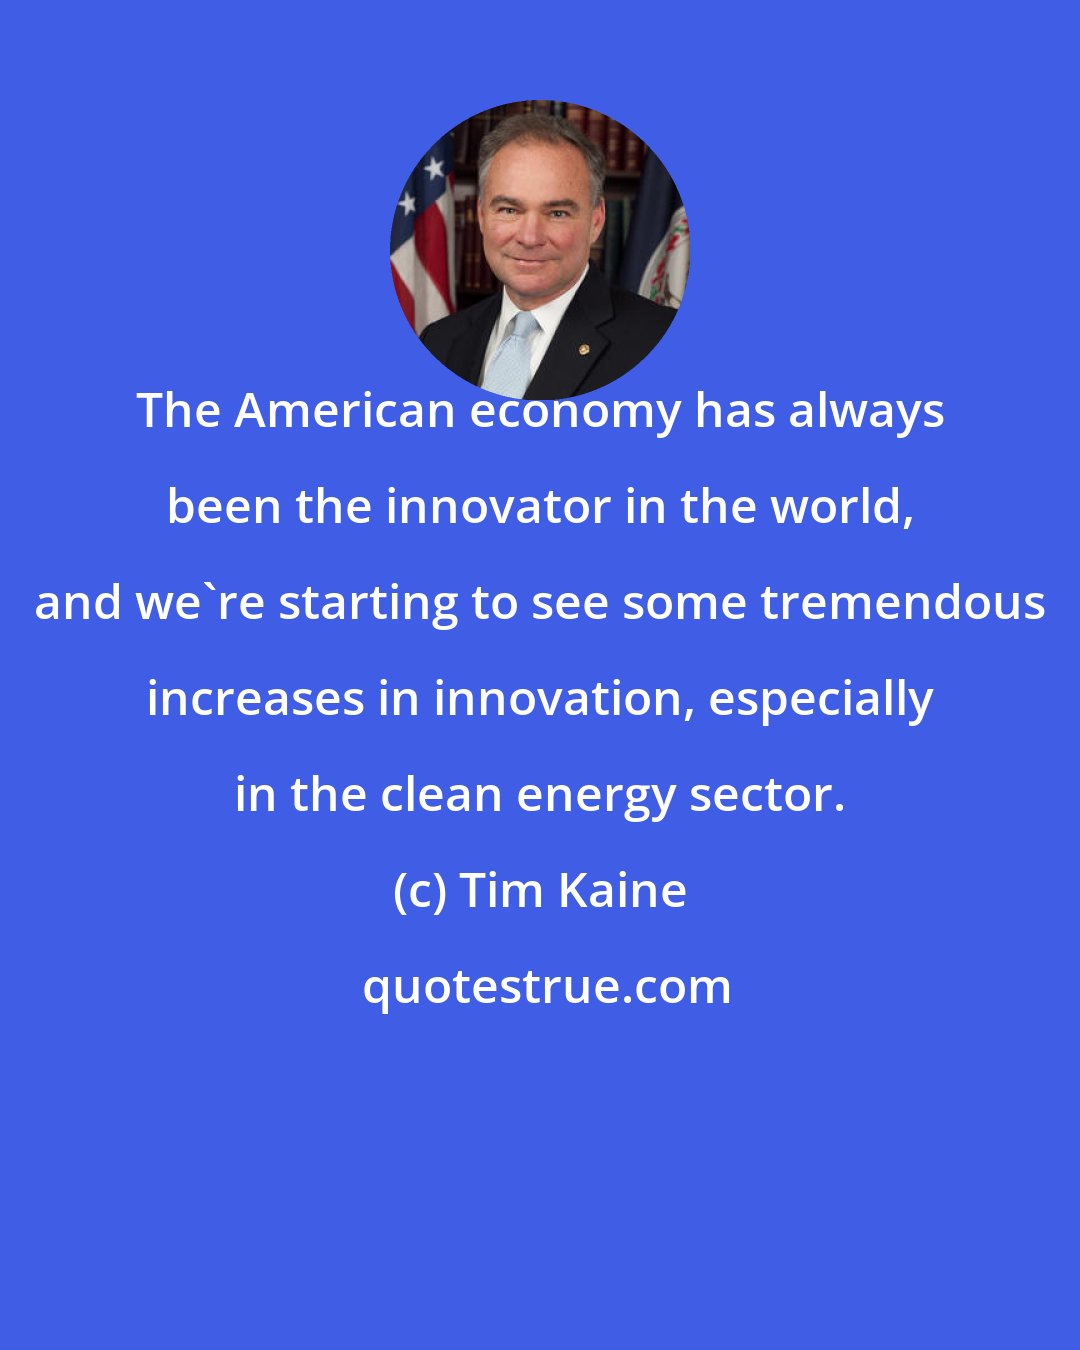 Tim Kaine: The American economy has always been the innovator in the world, and we're starting to see some tremendous increases in innovation, especially in the clean energy sector.